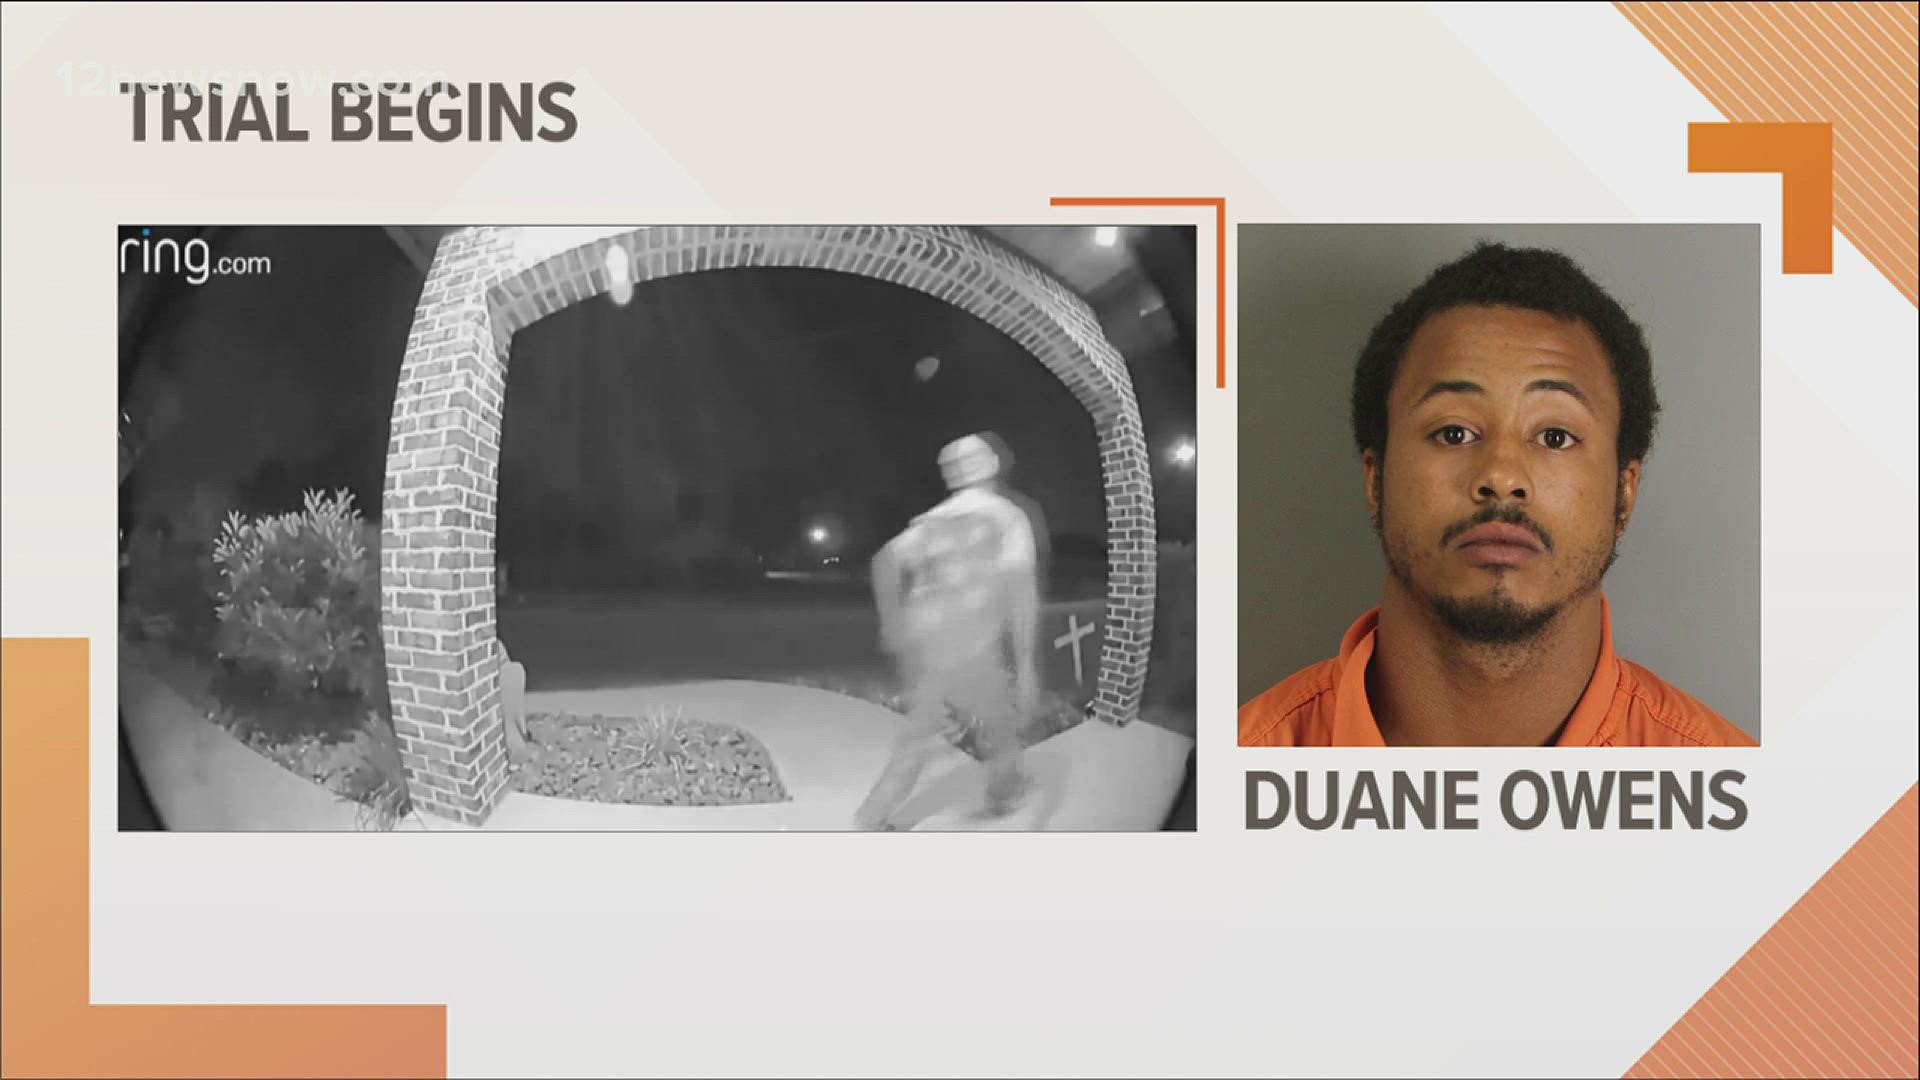 Duane Owens is facing a slew of charge. This trial will only address the trafficking charge.